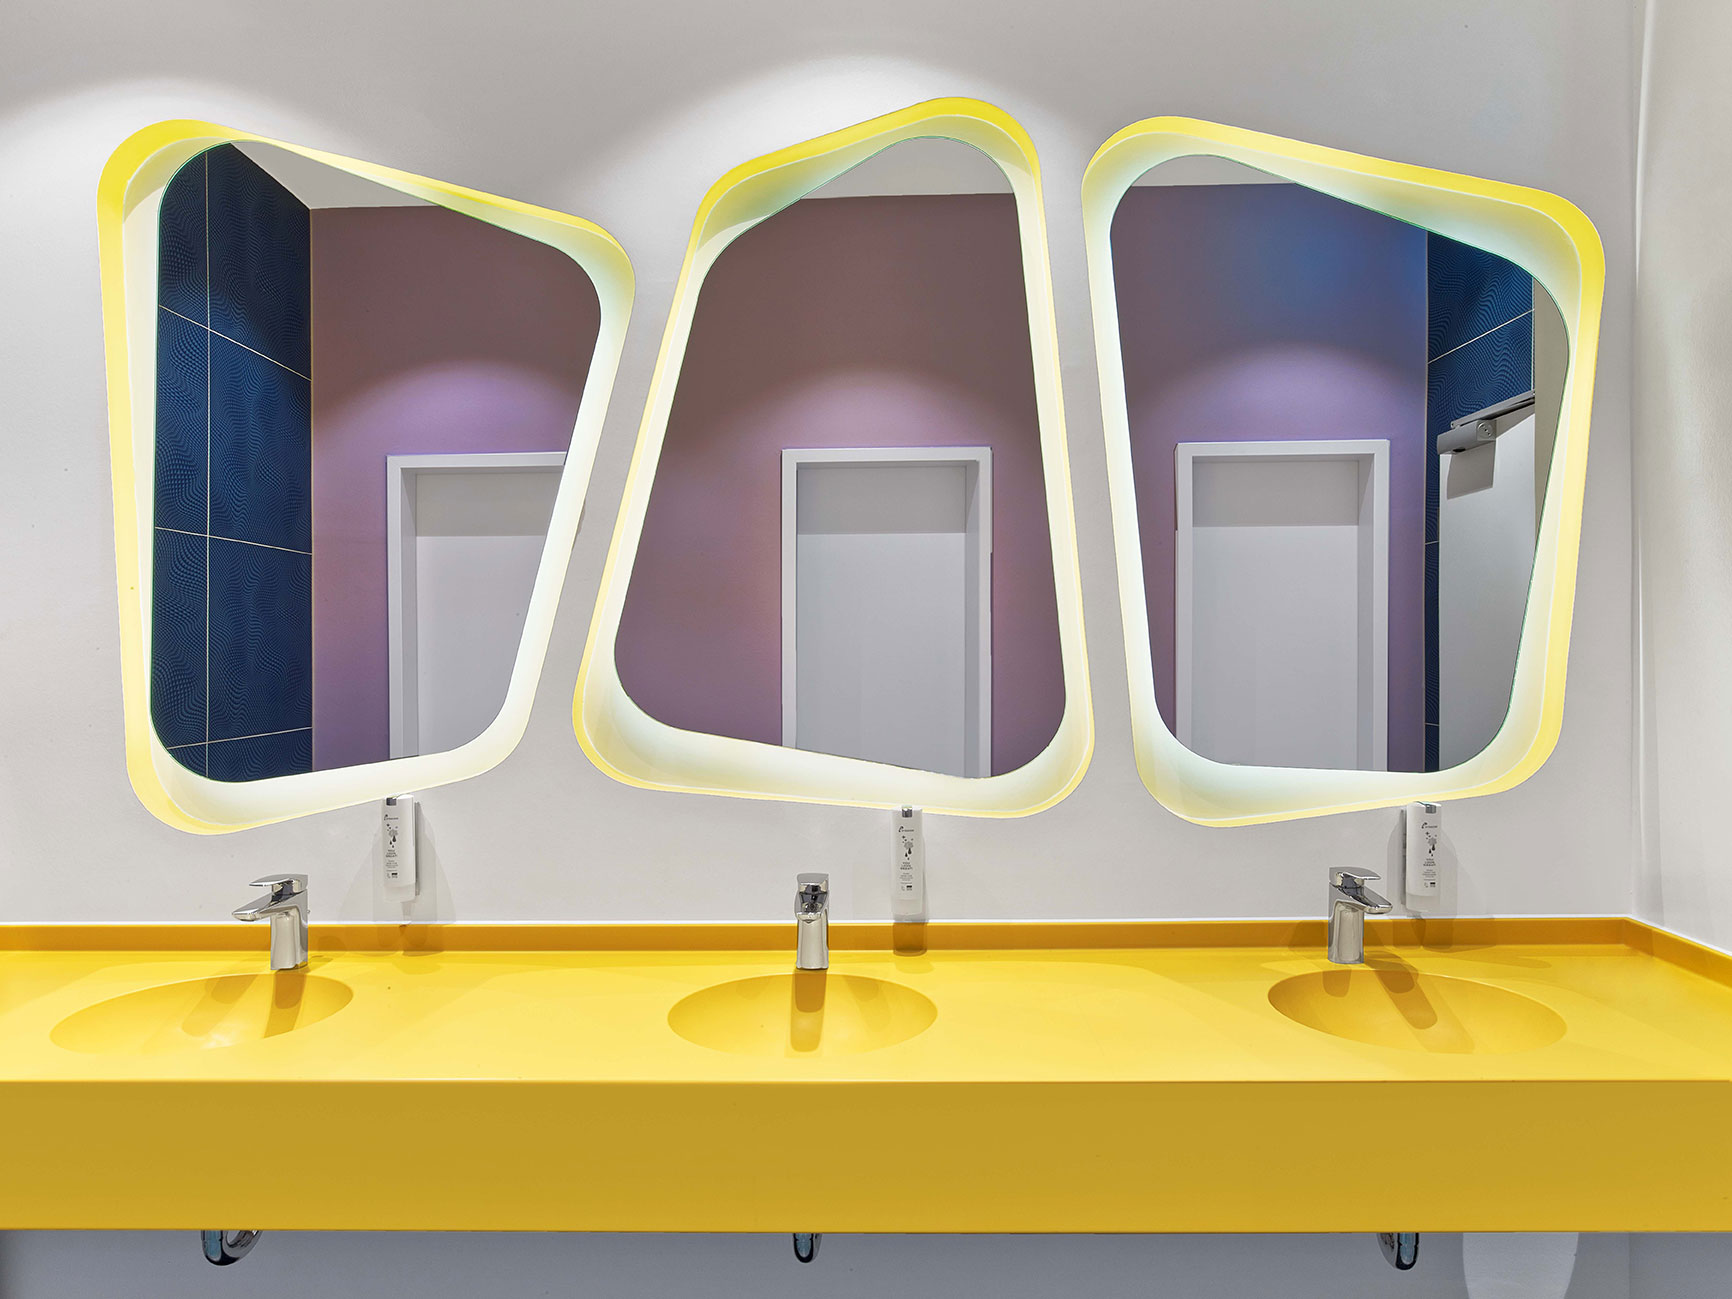 Public bathroom at prizeotel Hanover-City with three curved mirrors and a yellow sink